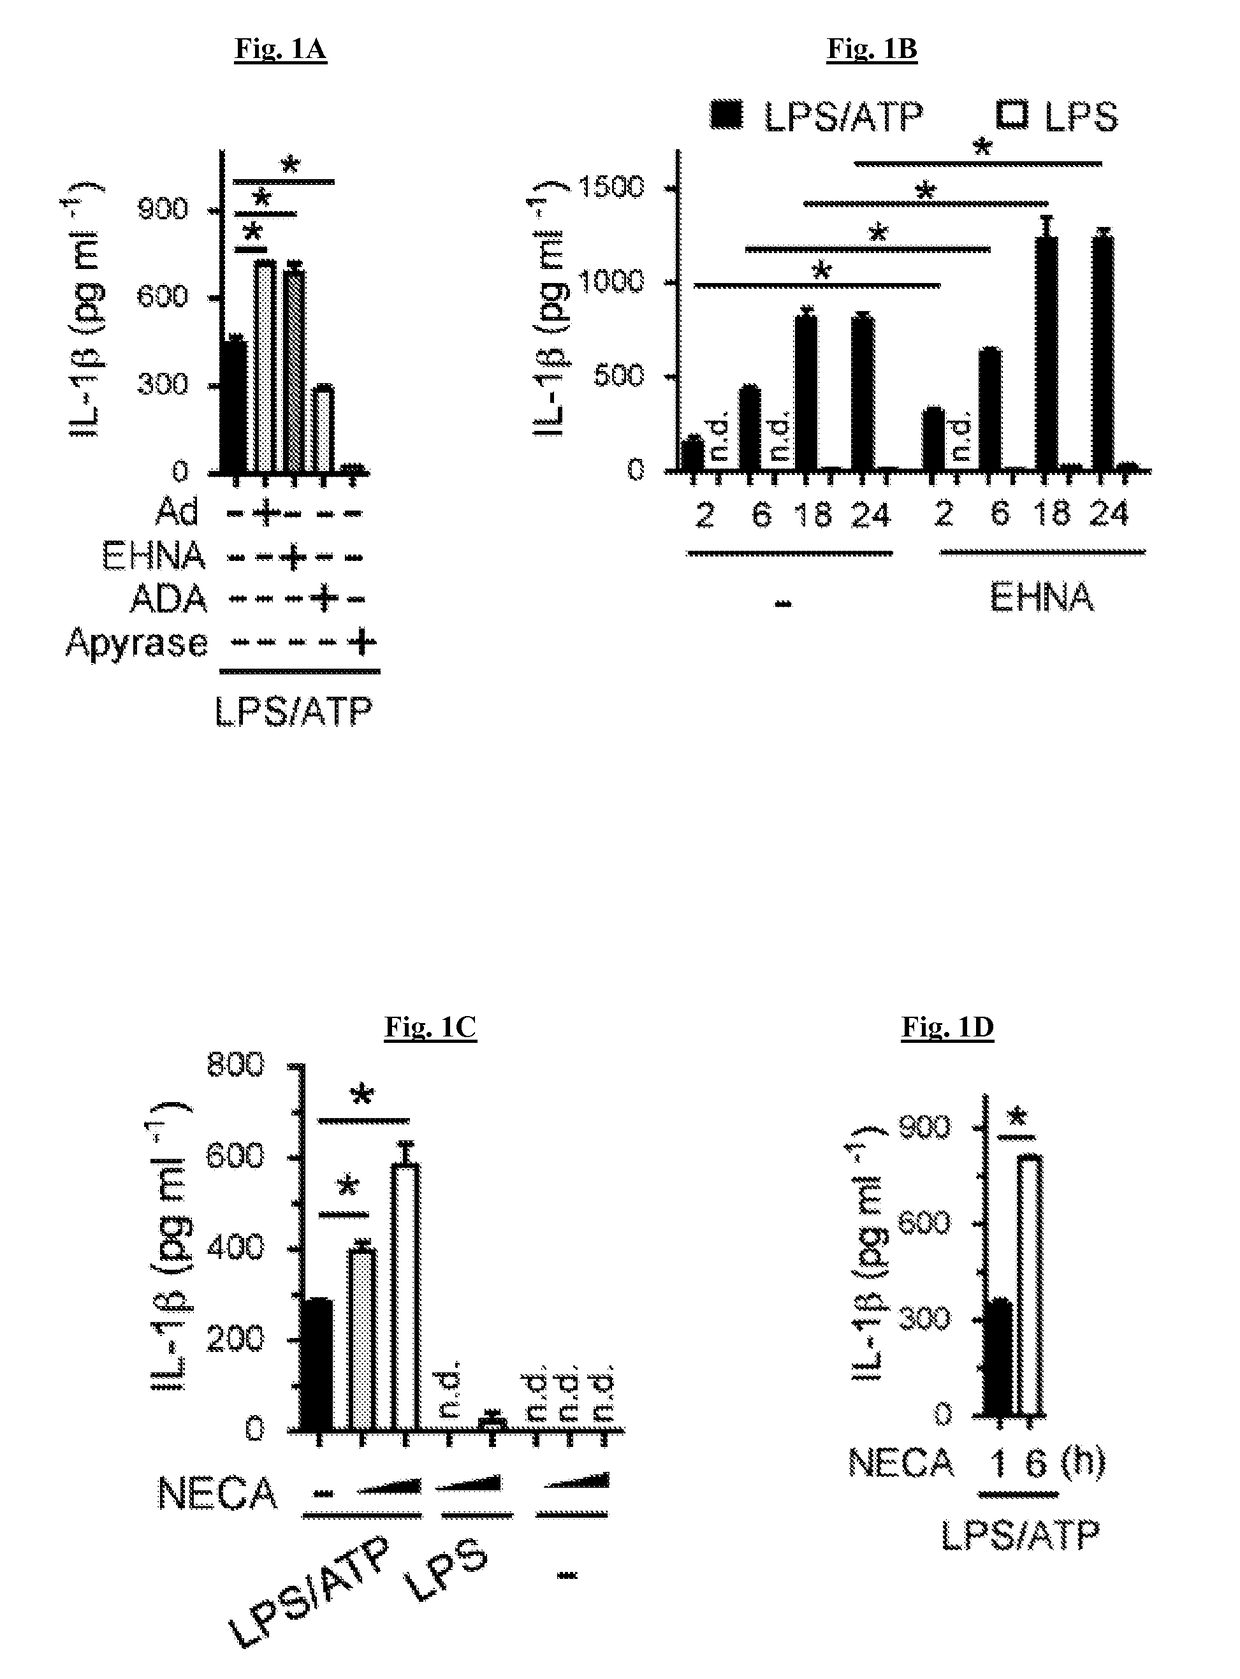 Novel compositions and methods useful for treating or preventing liver diseases or disorders, and promoting weight loss